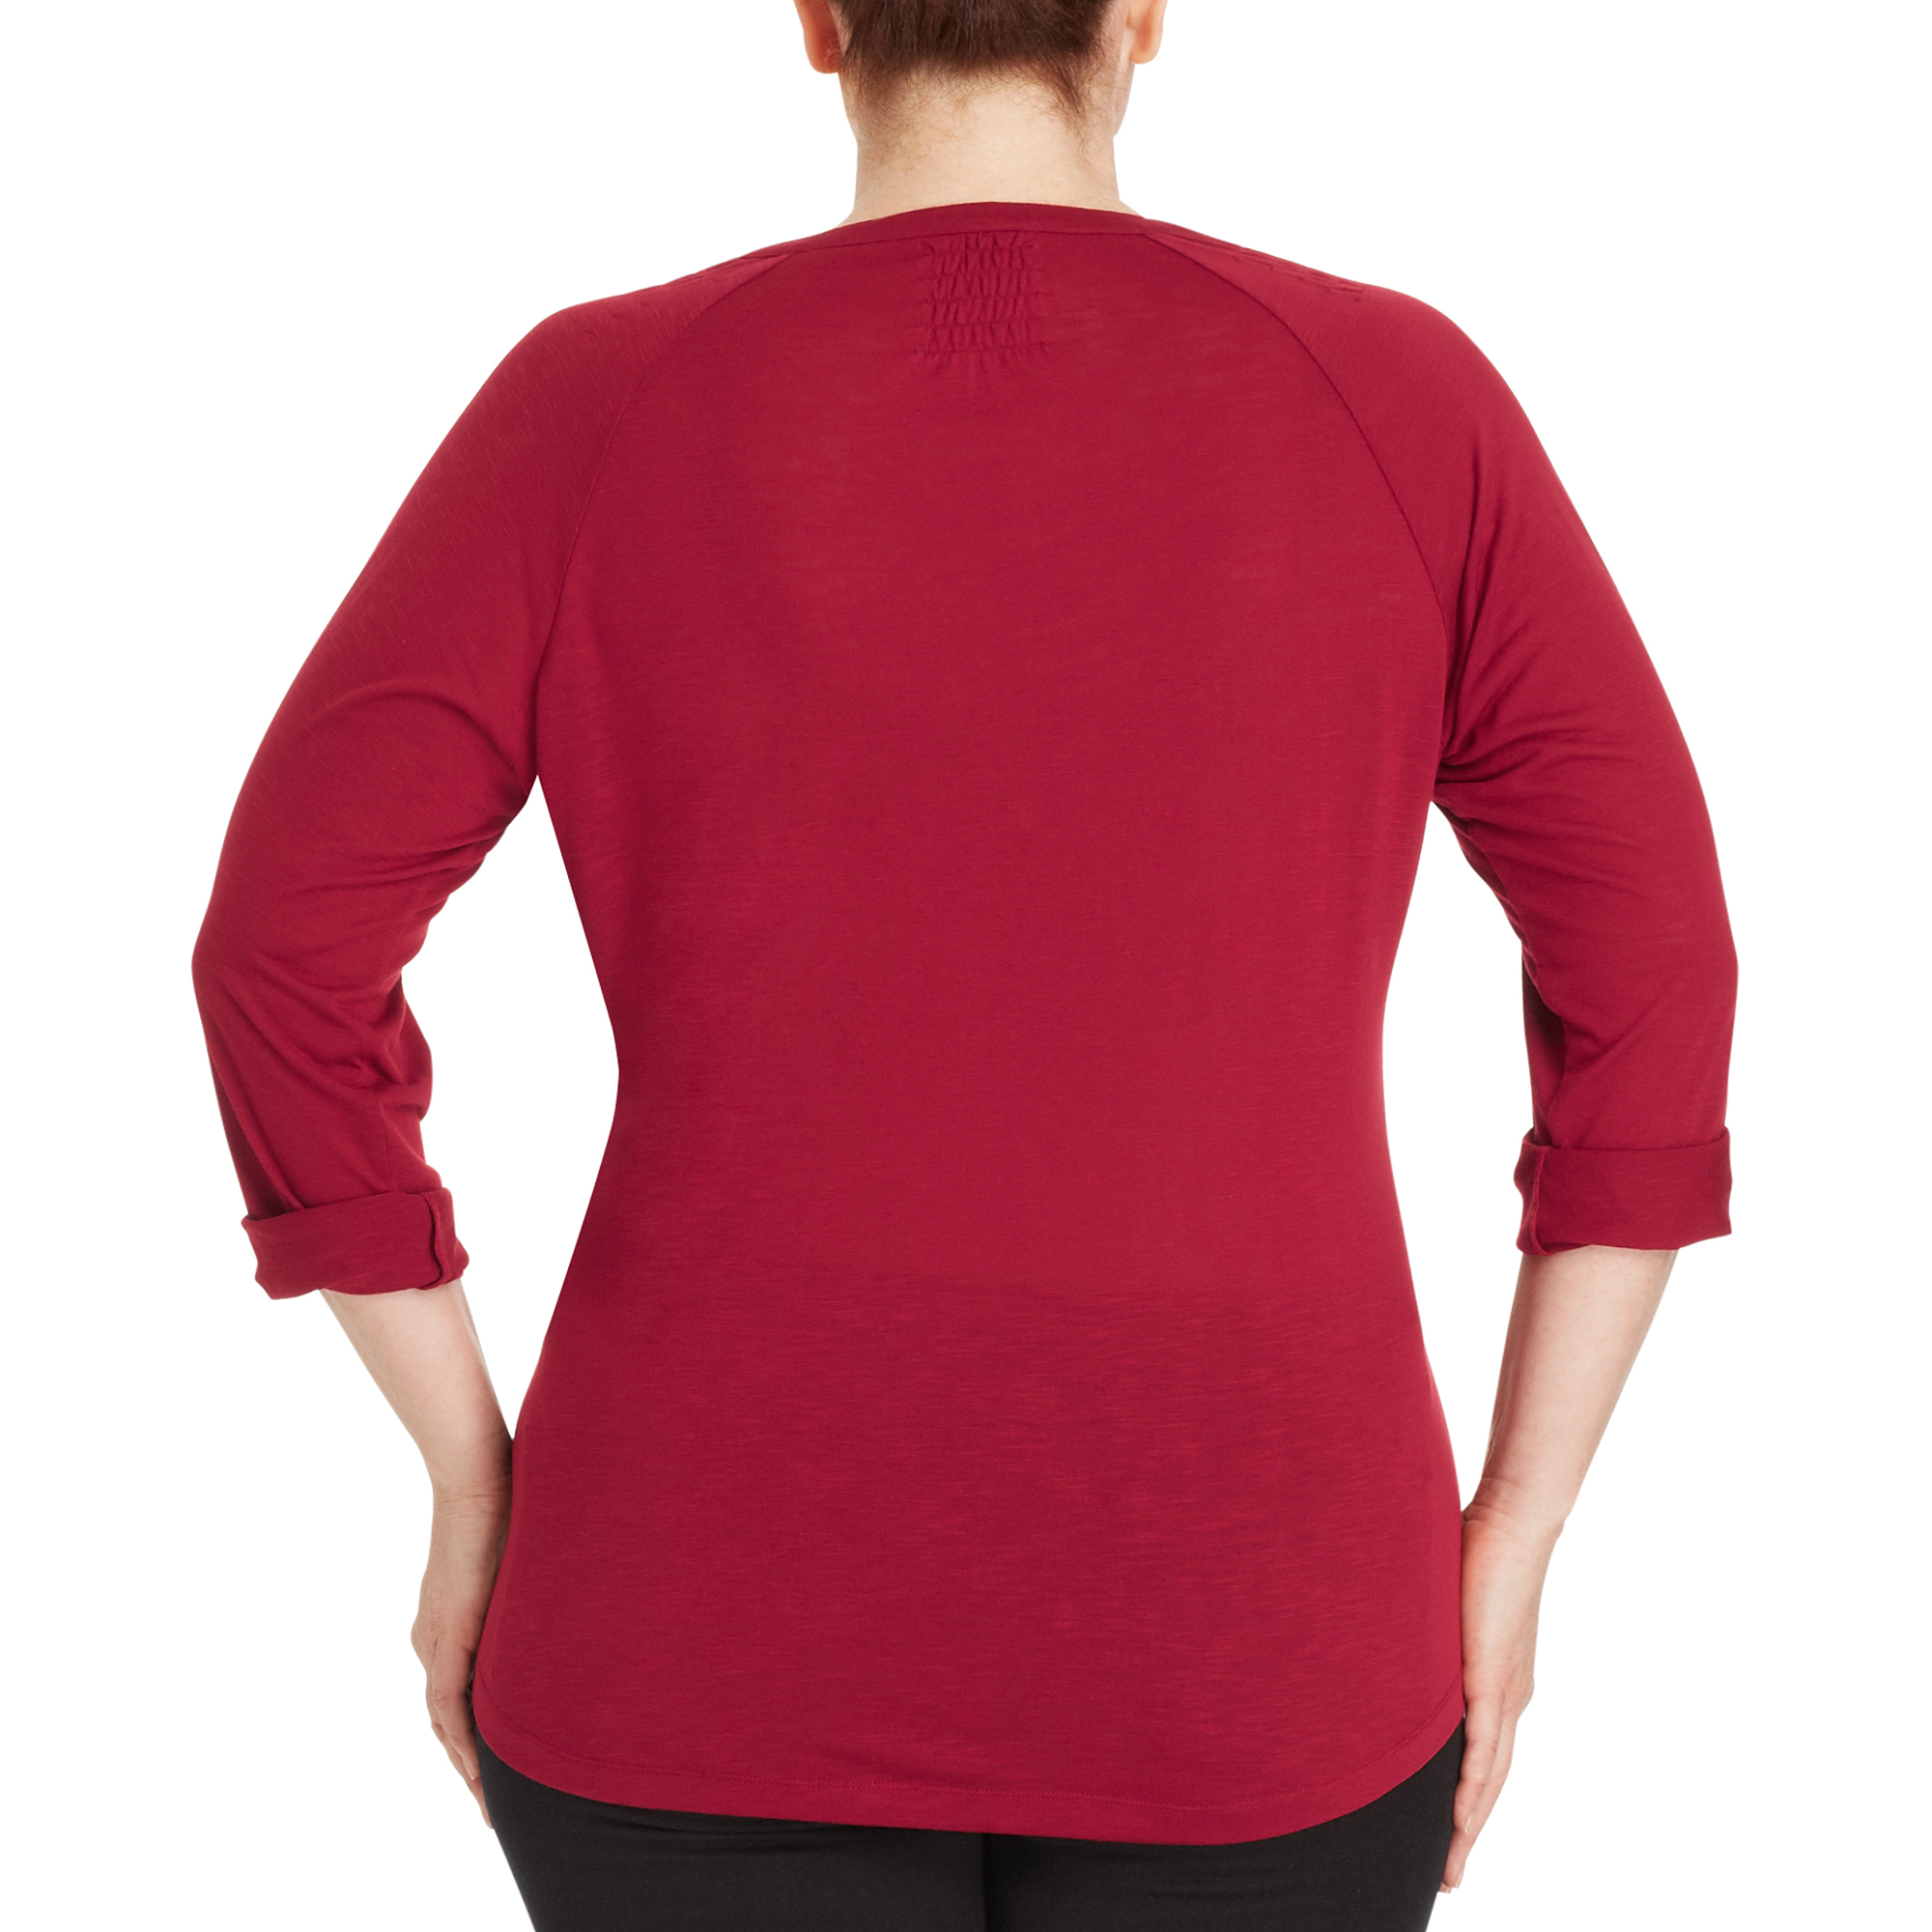 Women's Plus-Size Pintuck Henley with Rolled Sleeves - image 2 of 2